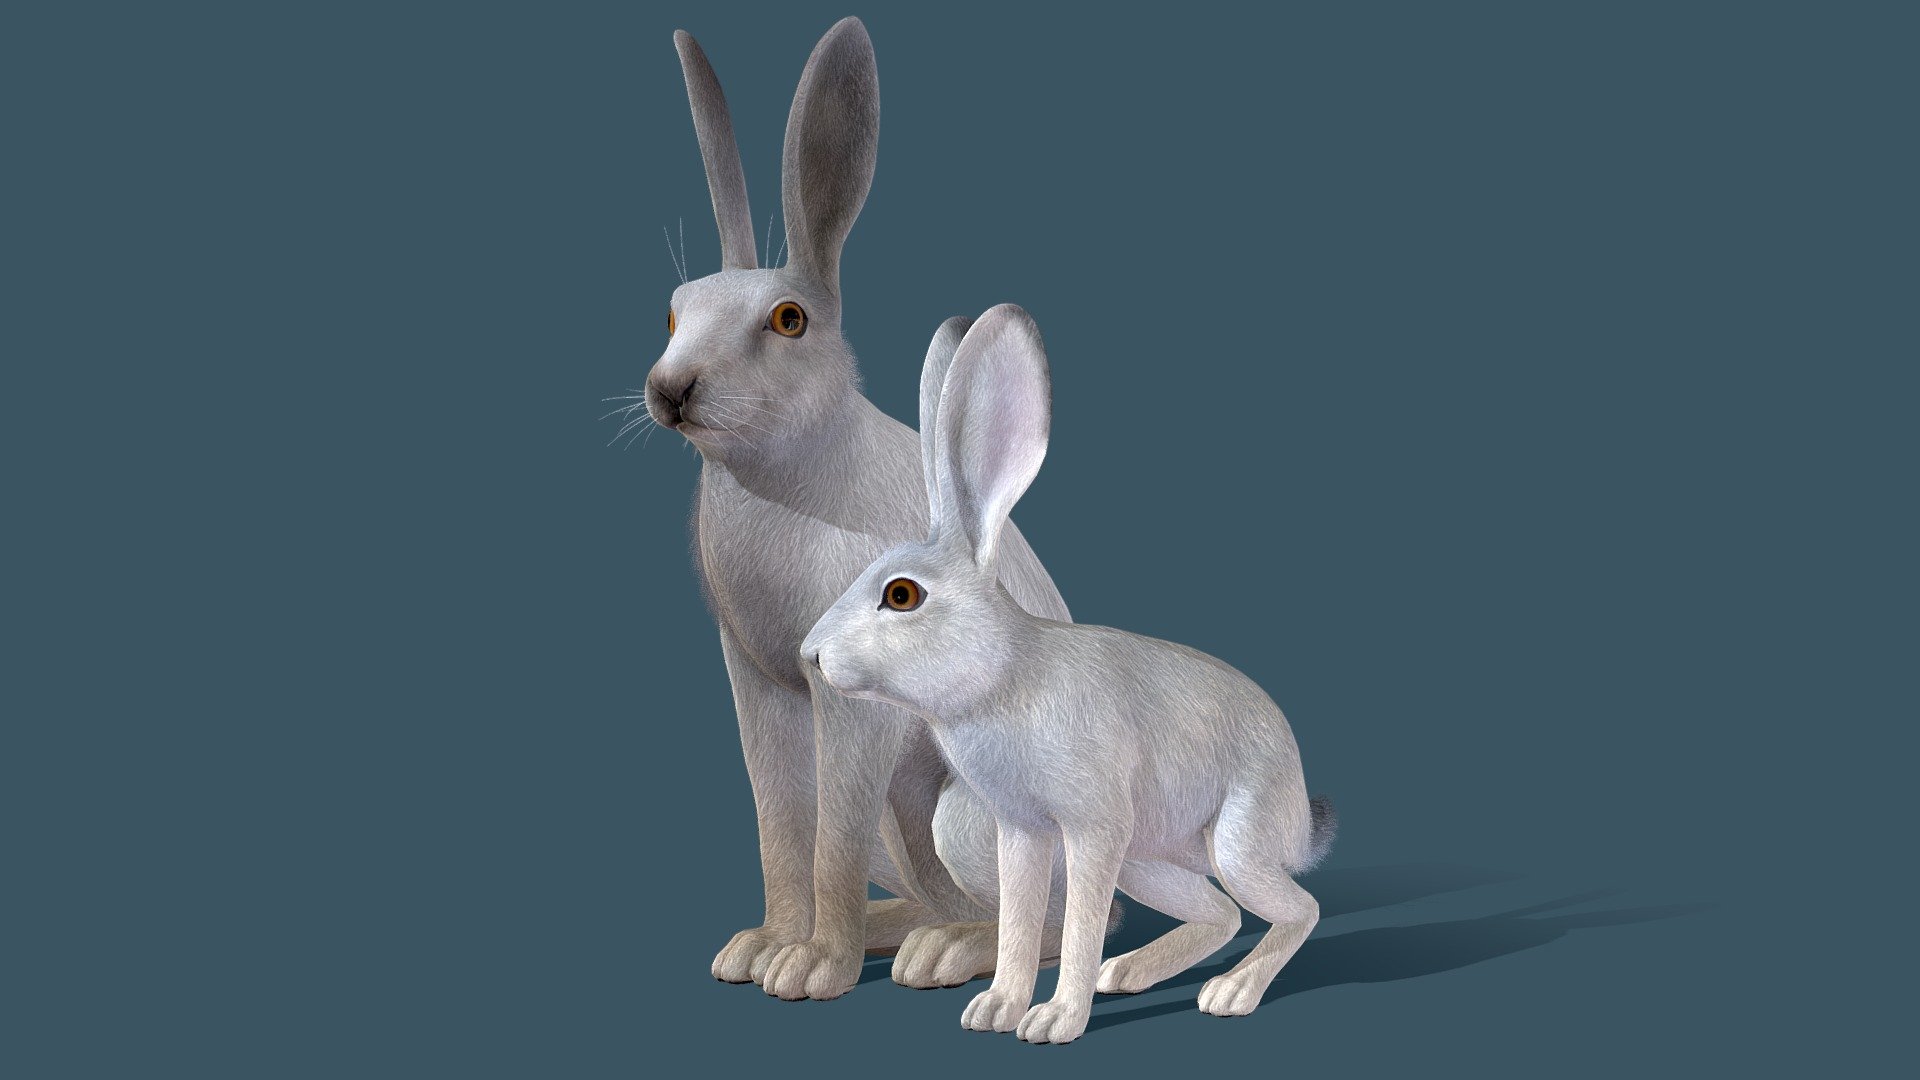 All files with animations are in the attached archive.

This asset includes:

adult hare
young hare

If you have questions, write to me 3d model